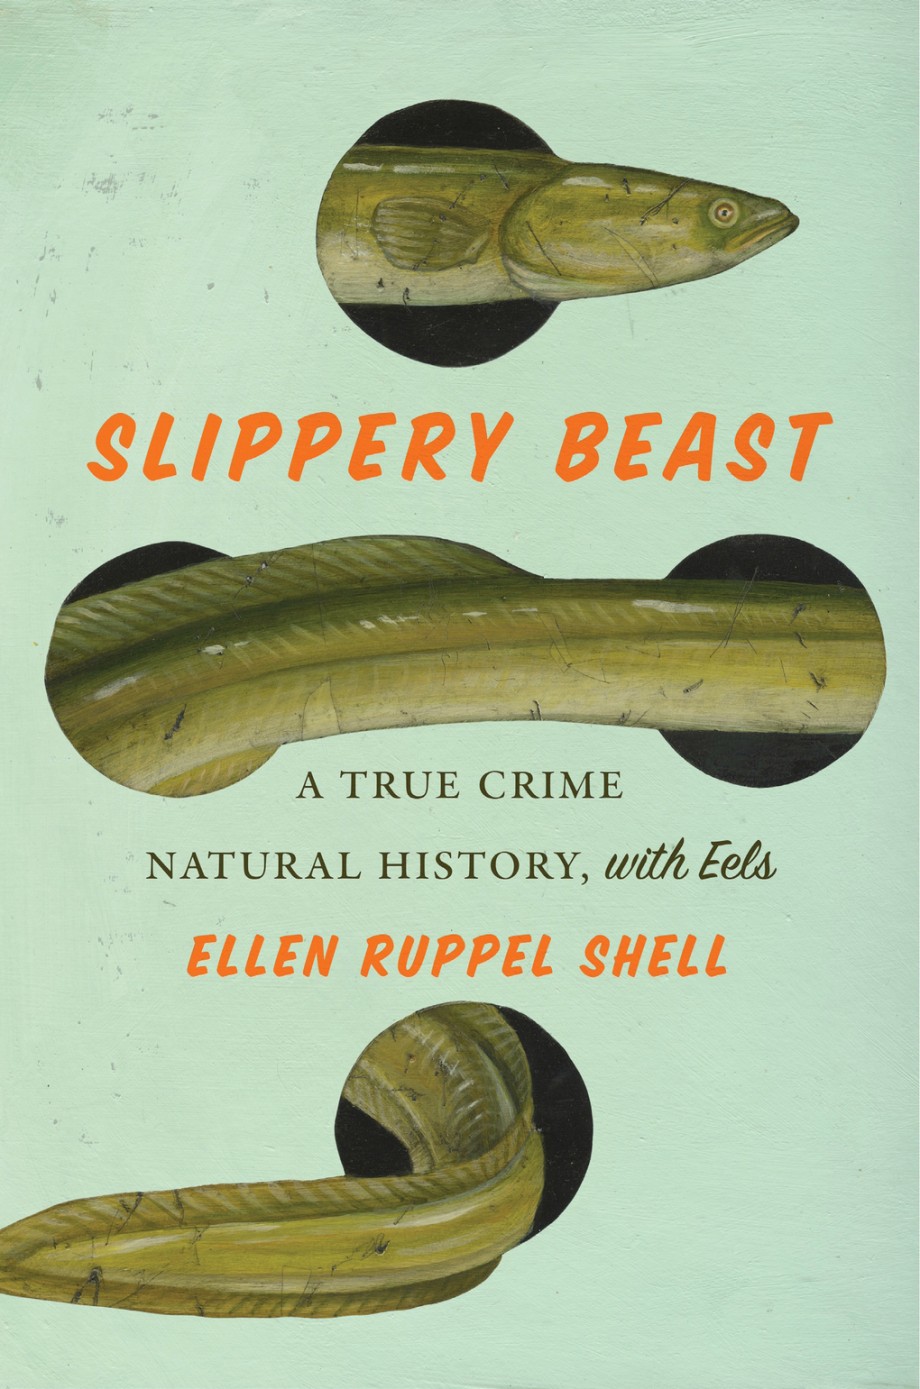 Slippery Beast A True Crime Natural History, with Eels